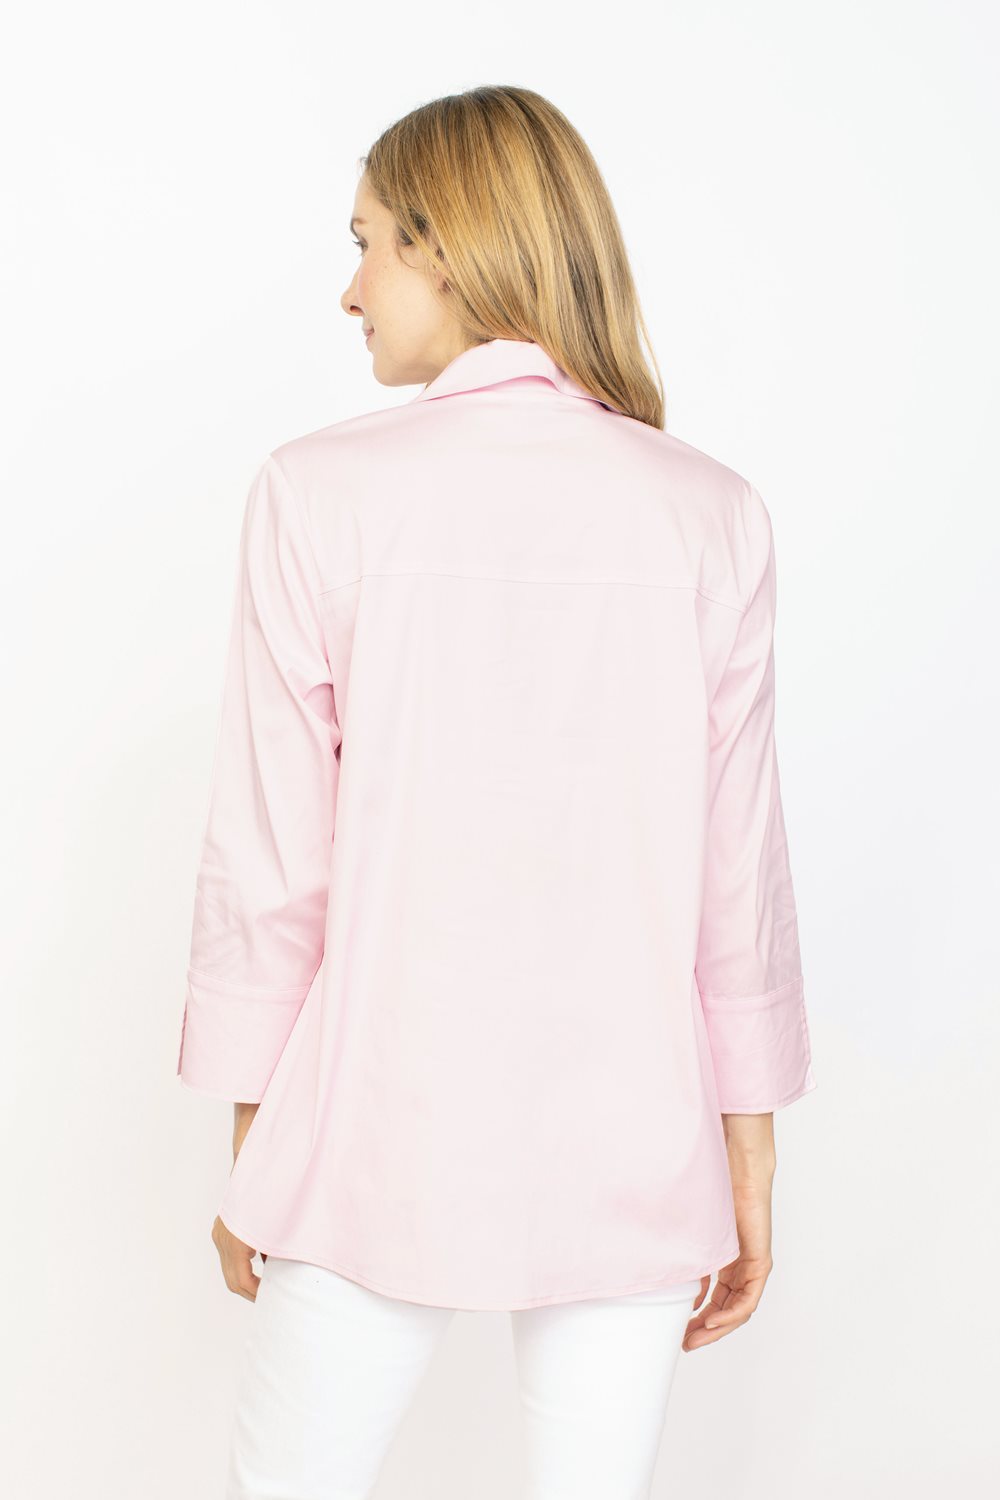 Cotton "The One" Shirt with Hidden Placket by Habitat